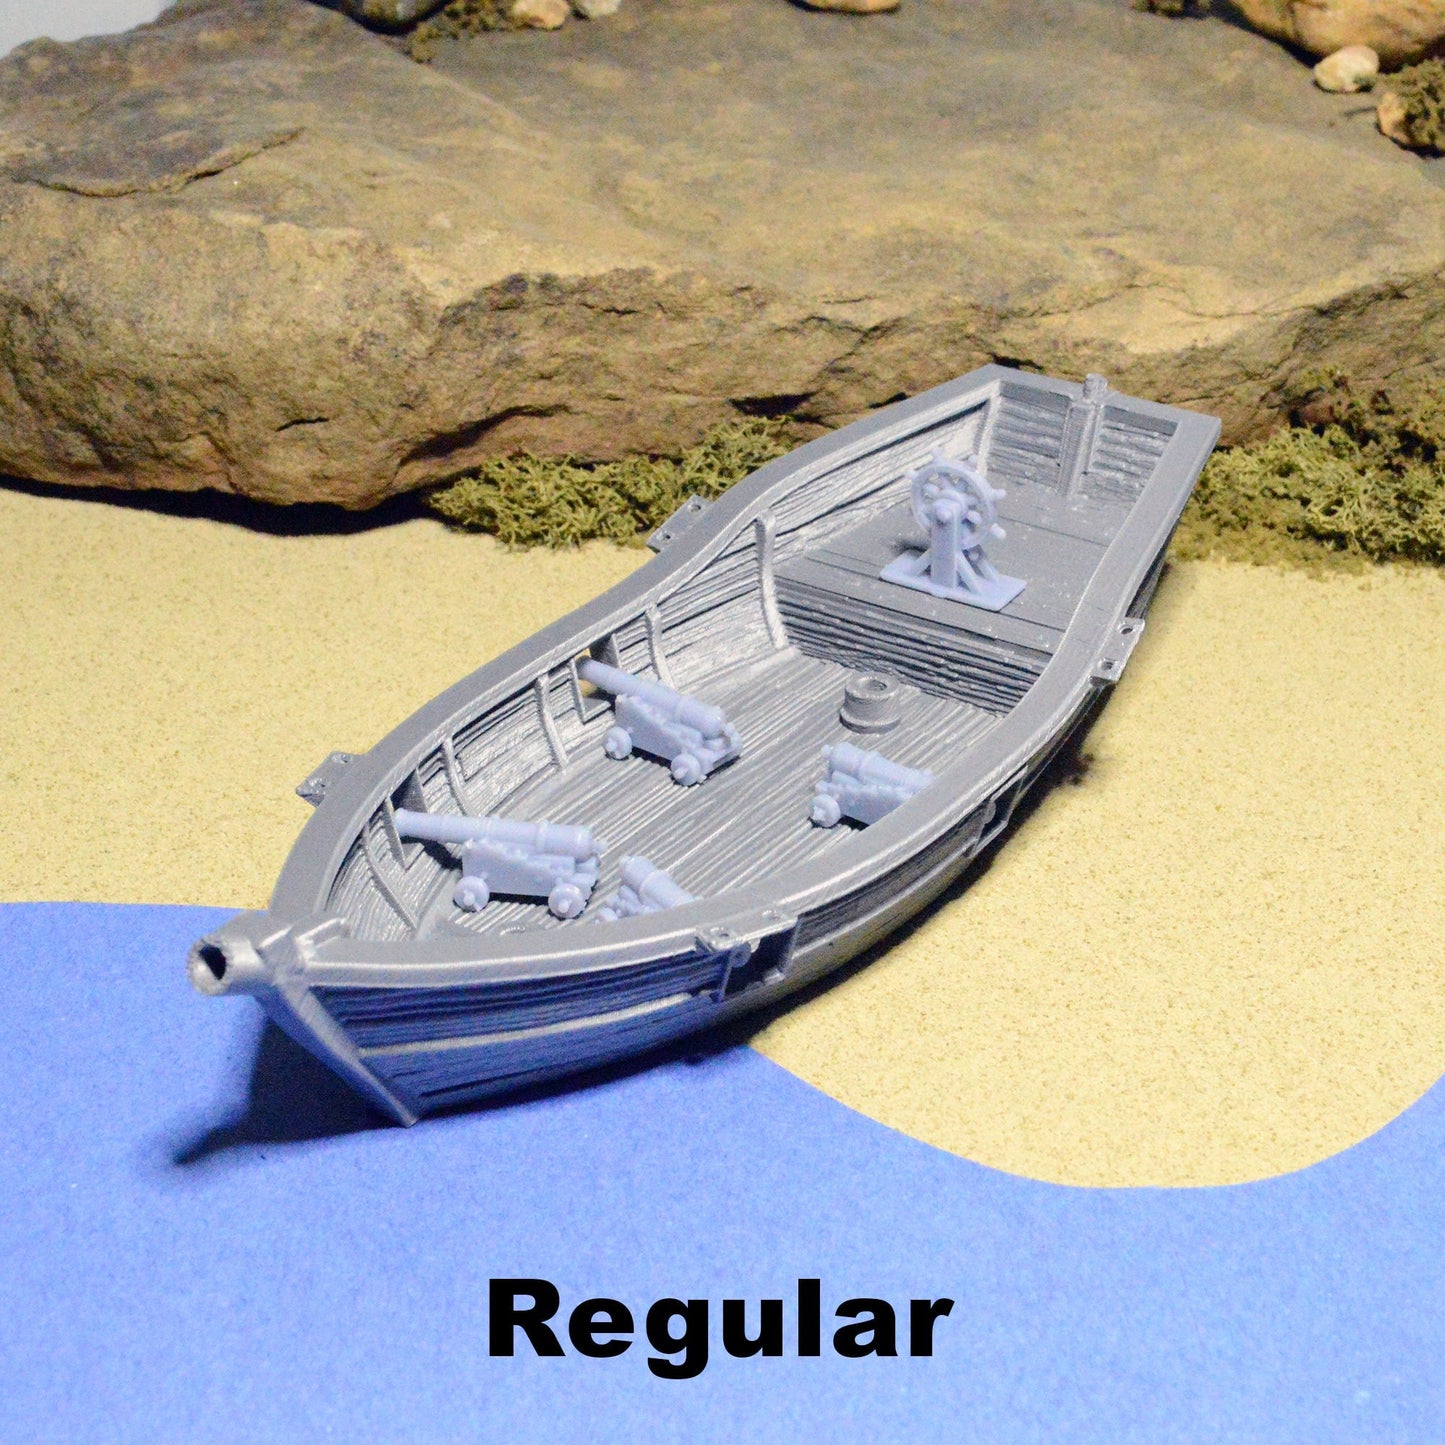 Miniature Skiff 28mm for D&D Ship, DnD Pathfinder Fantasy Pirate Boat, Blood and Plunder, Ghosts of Saltmarsh